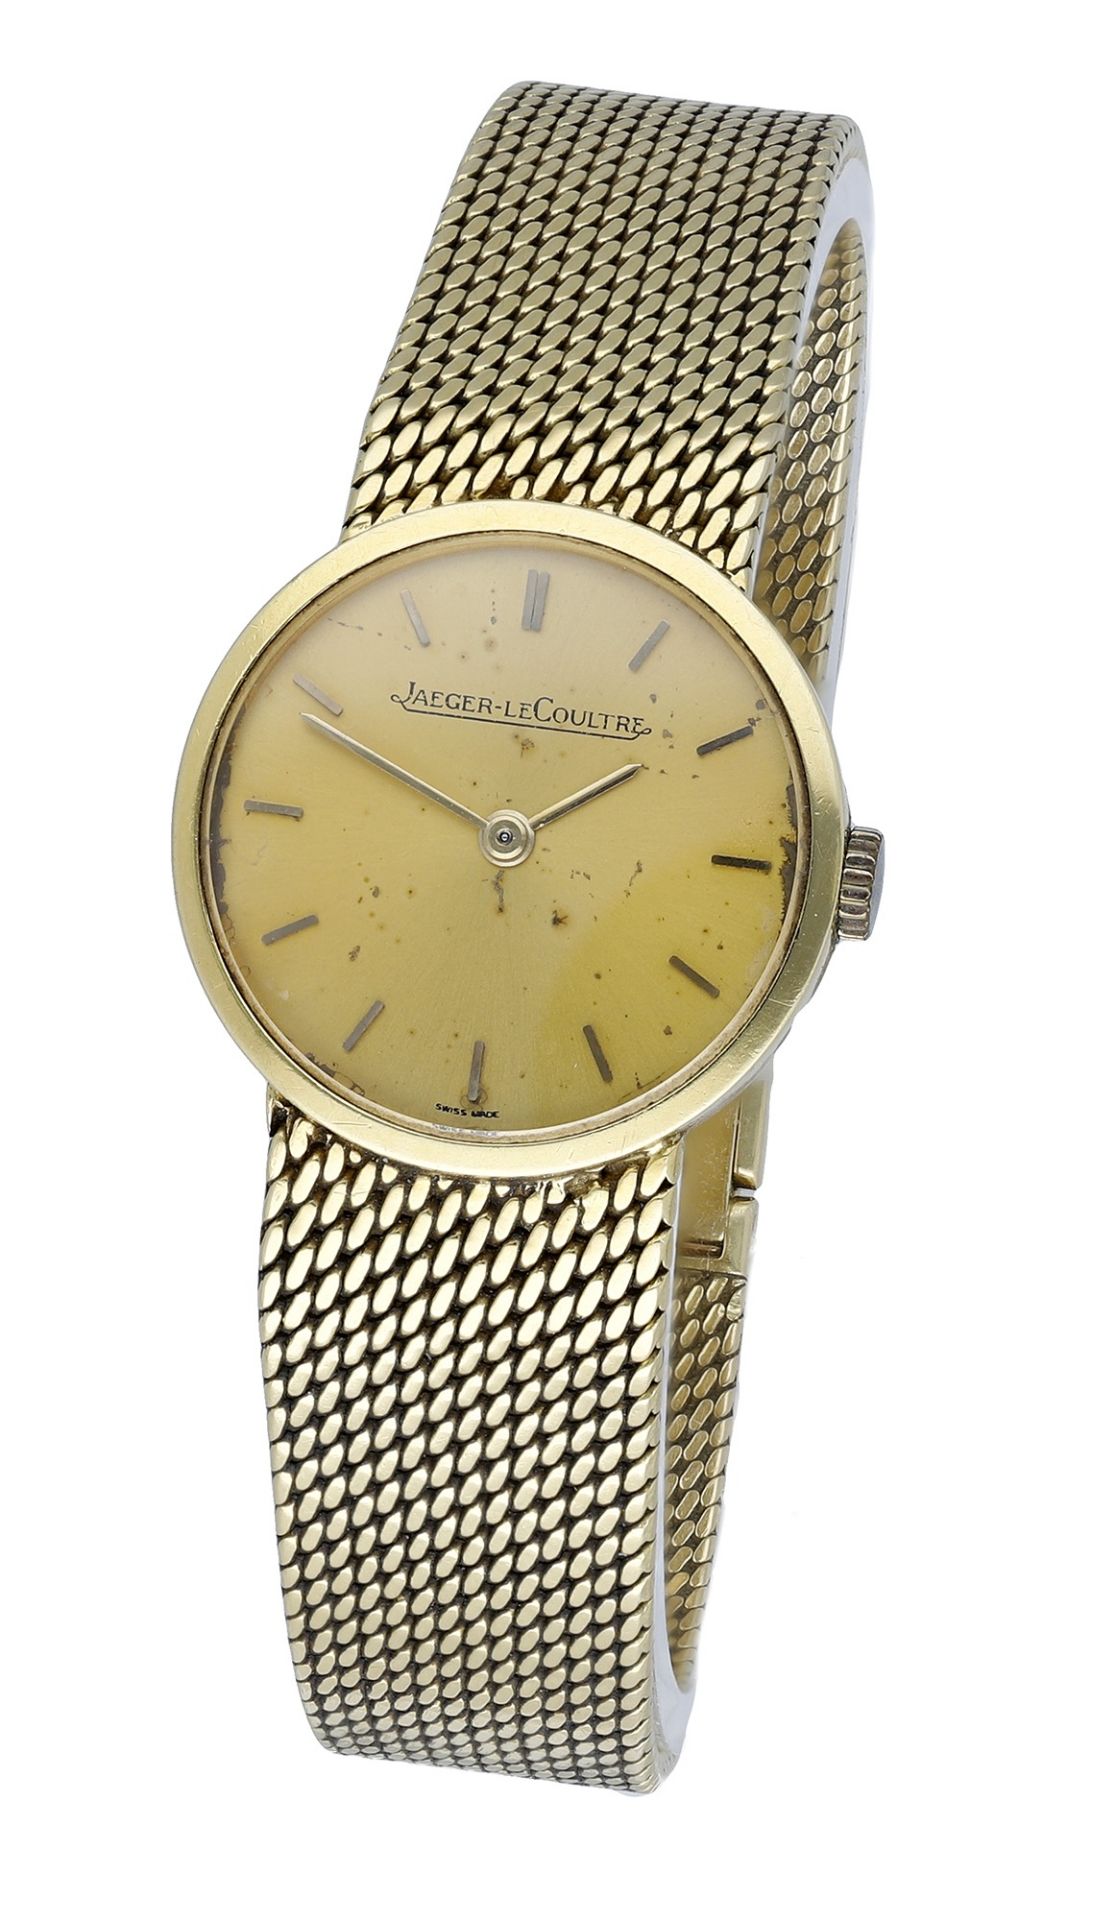 Jaeger LeCoultre. A lady's gold bracelet watch, circa 1966 Movement: manual winding, no. 17...